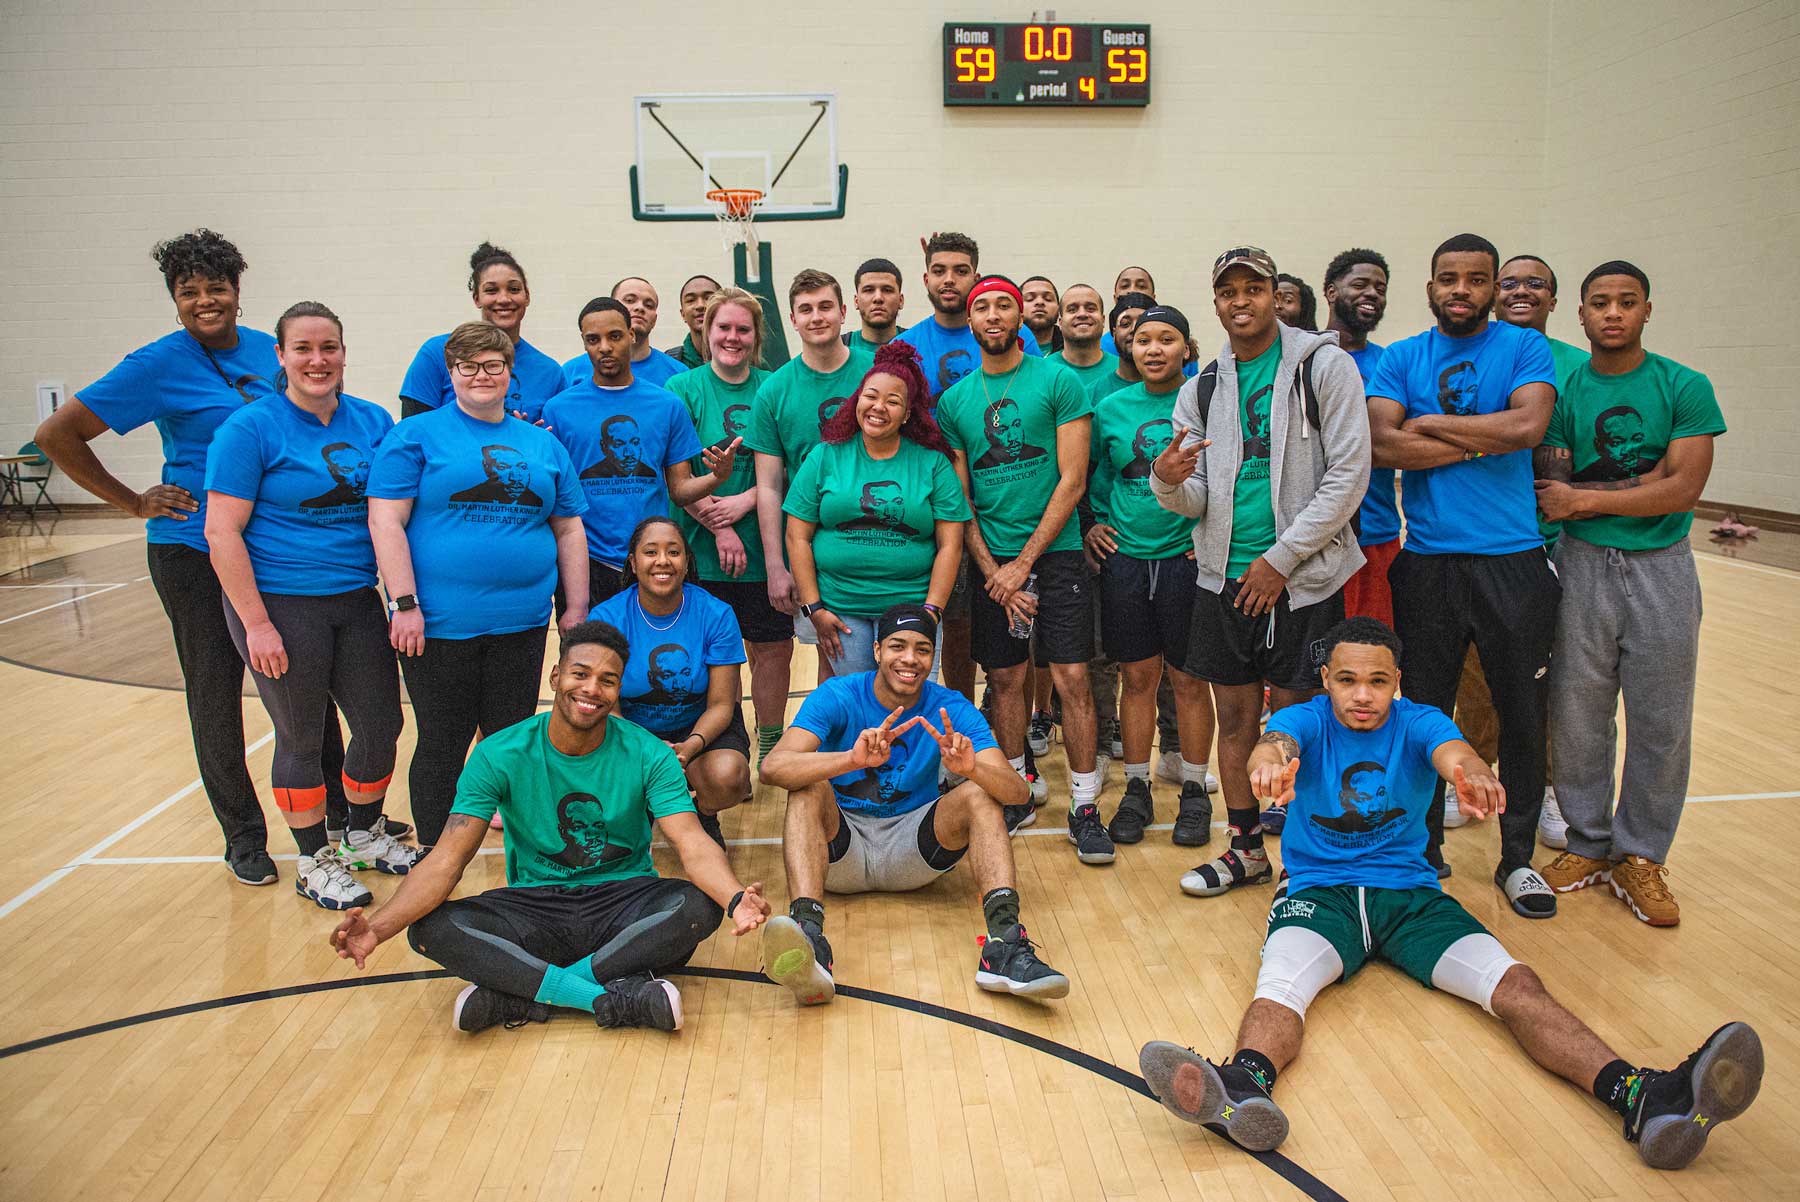 A group photo of participants in the MLK Jr. Day charity basketball game.